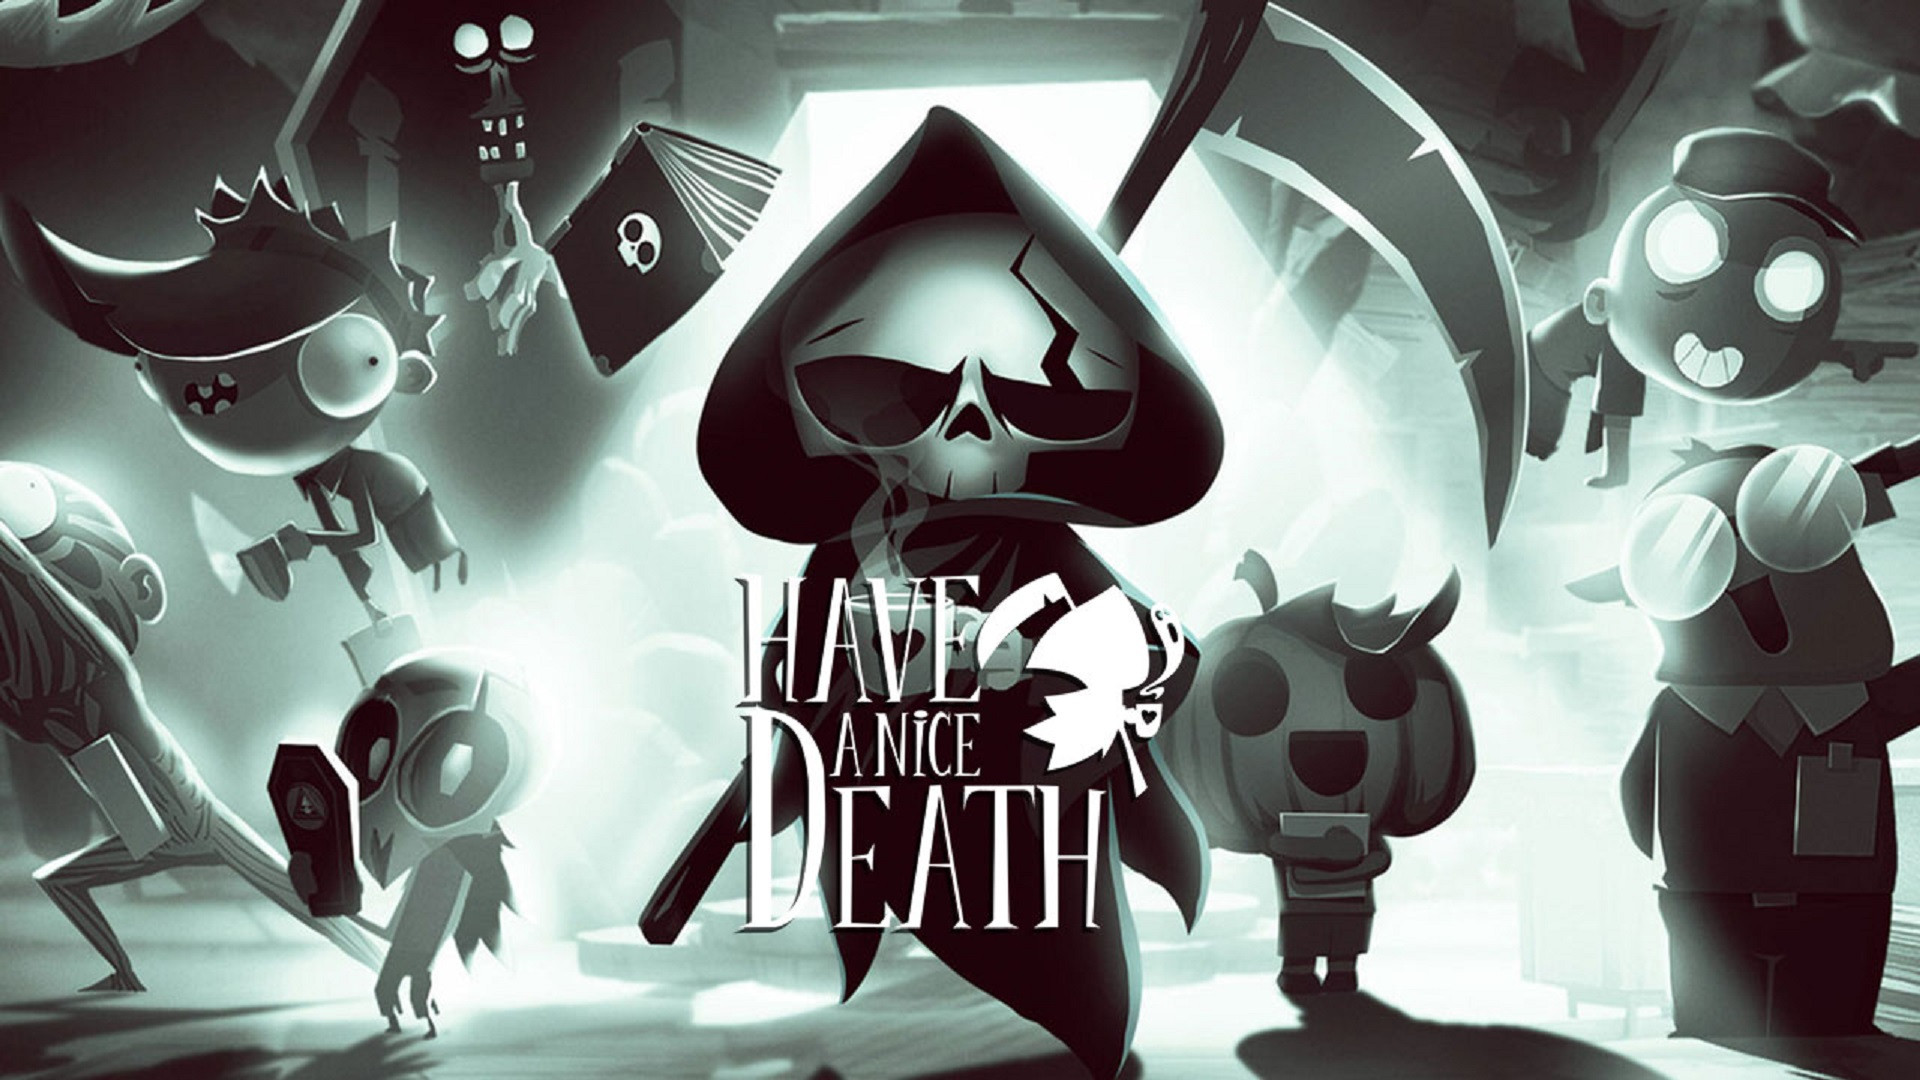 You have a game for me. Have a nice Death. Have a nice Death арты.